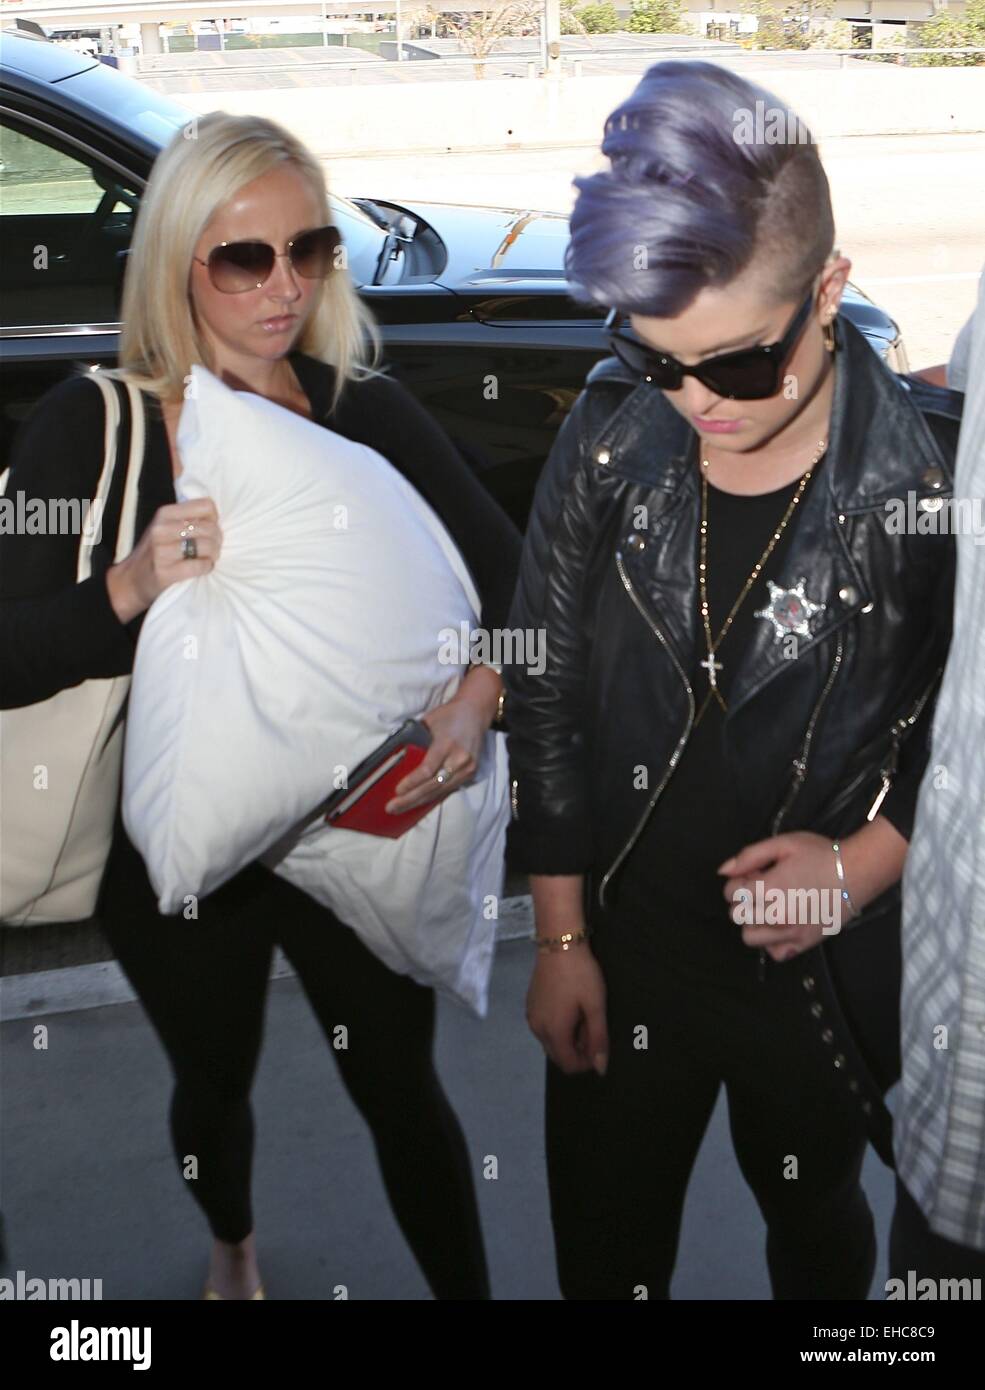 Kelly Osbourne arrives at Los Angeles International (LAX) airport Featuring: Kelly Osbourne Where: Los Angeles, California, United States When: 06 Sep 2014 Stock Photo